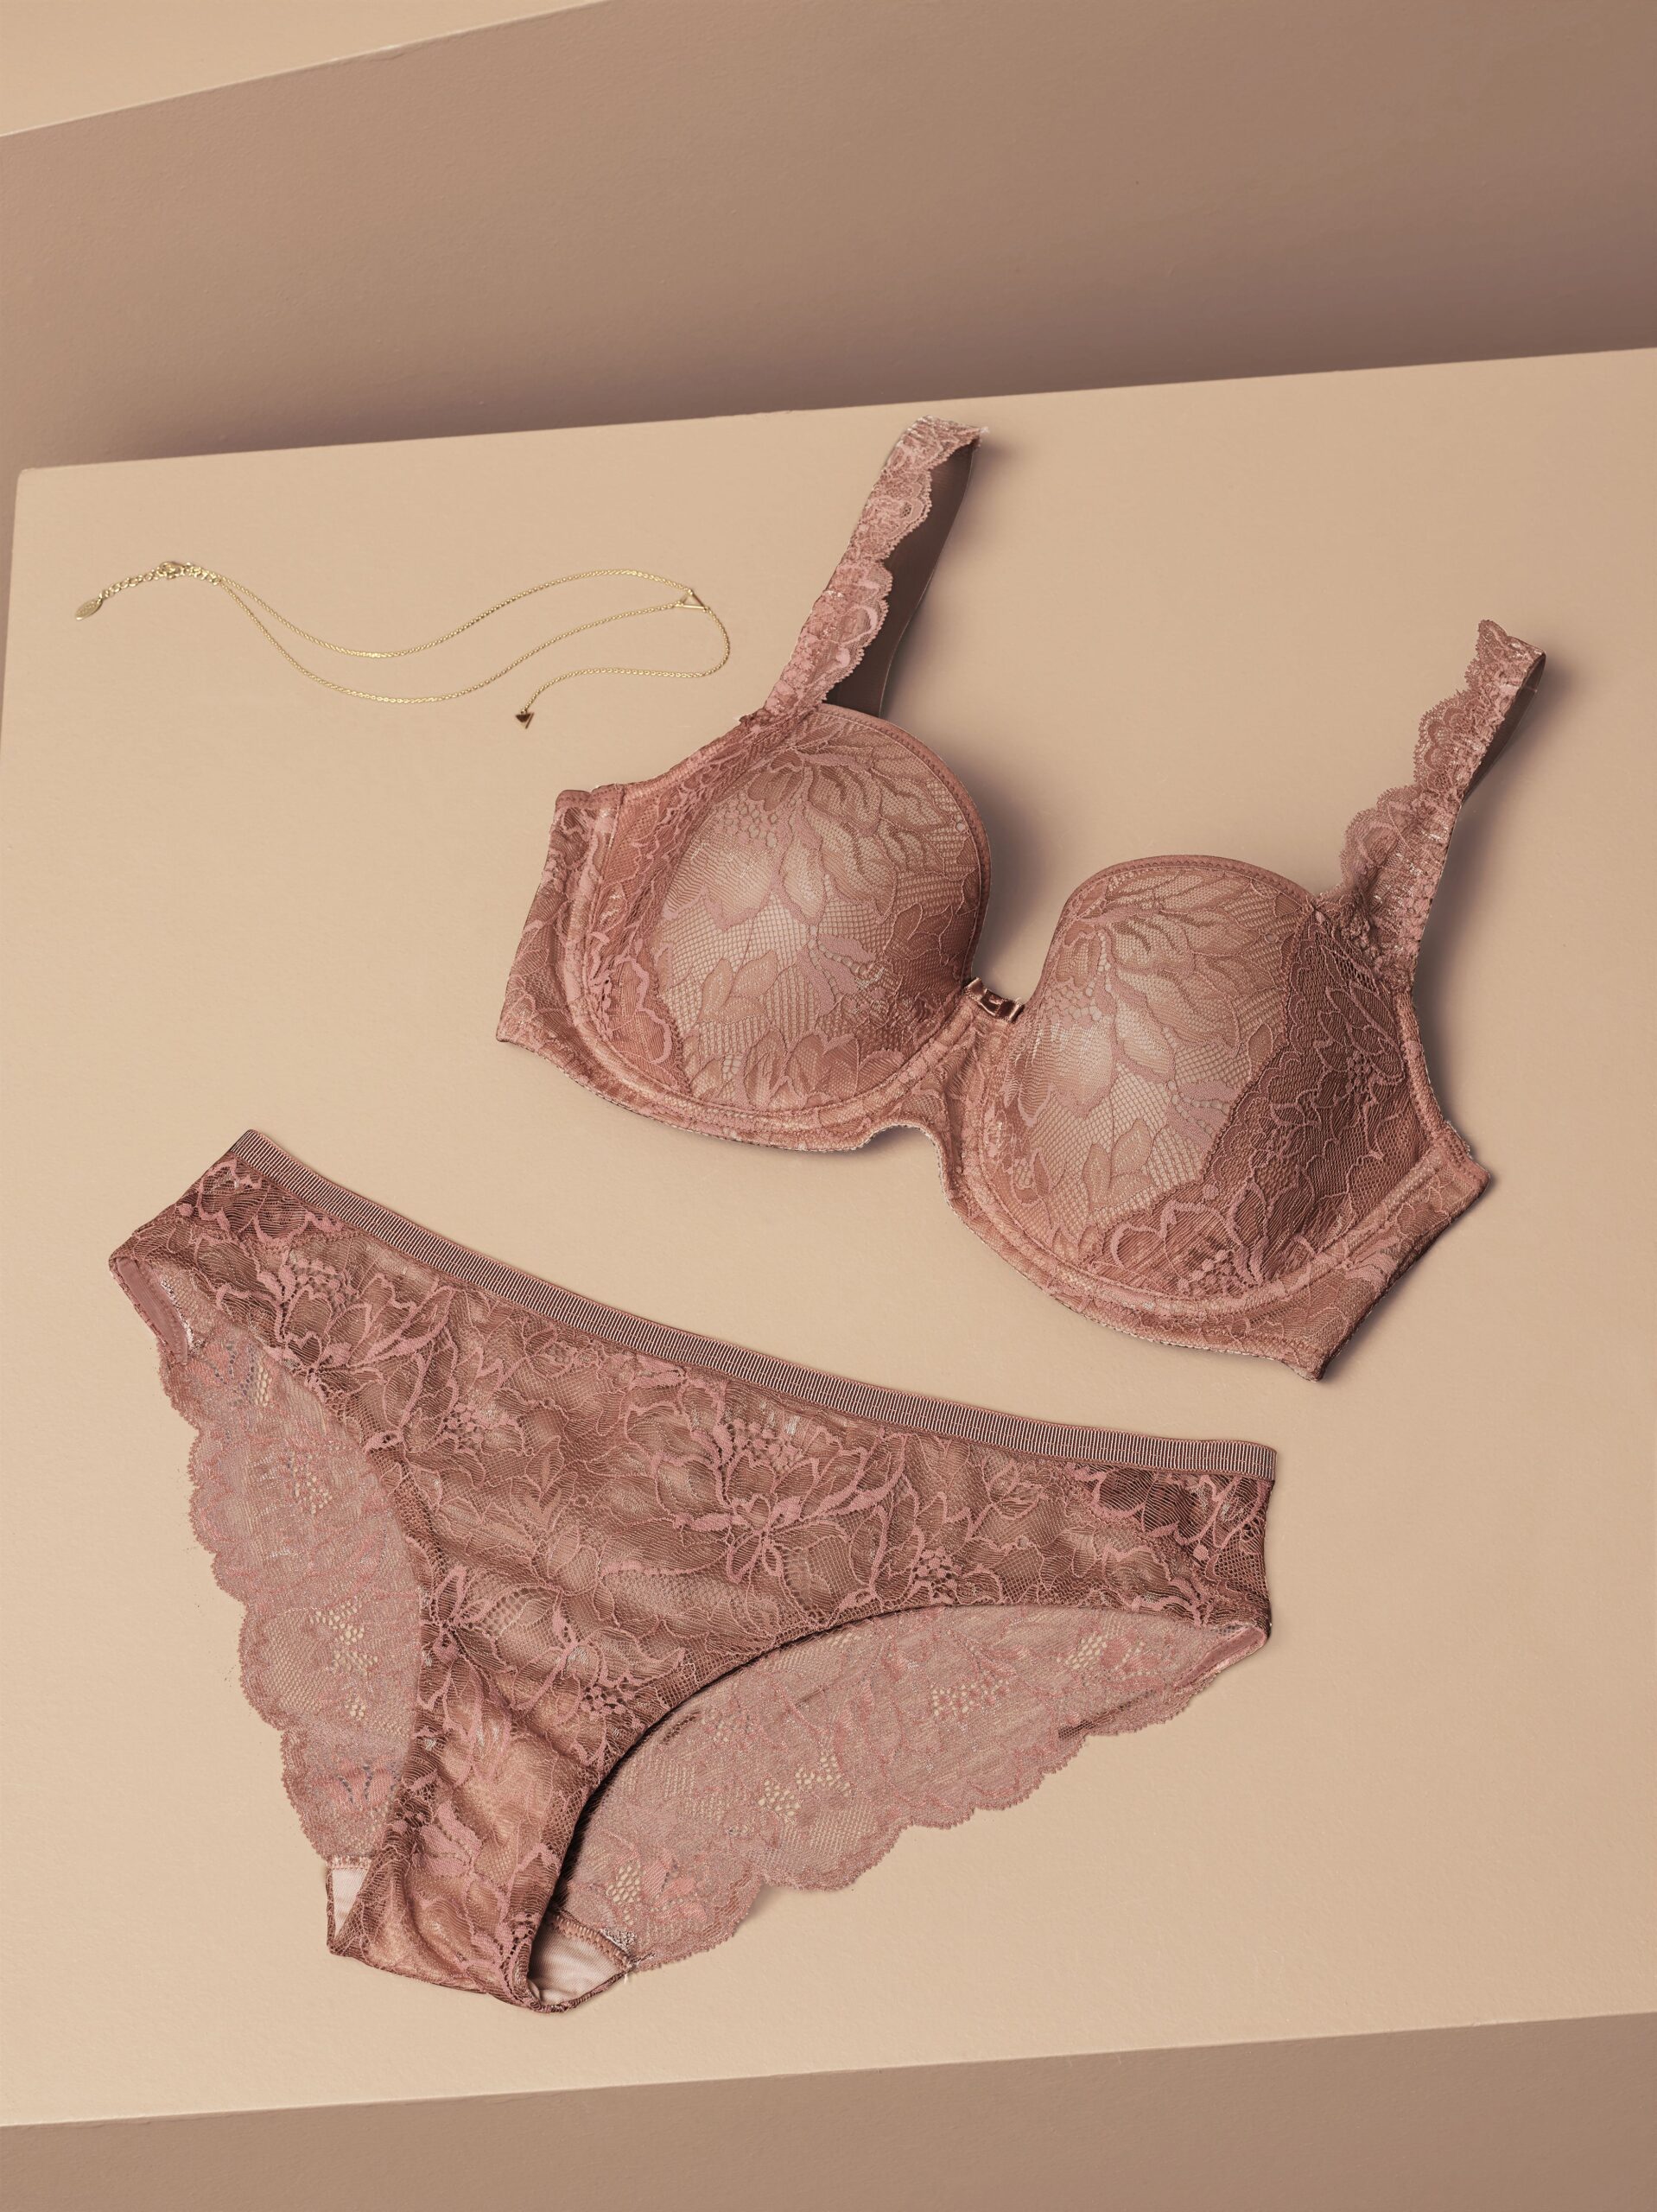 Perfect Fit: Find Confidence with Triumph Bras